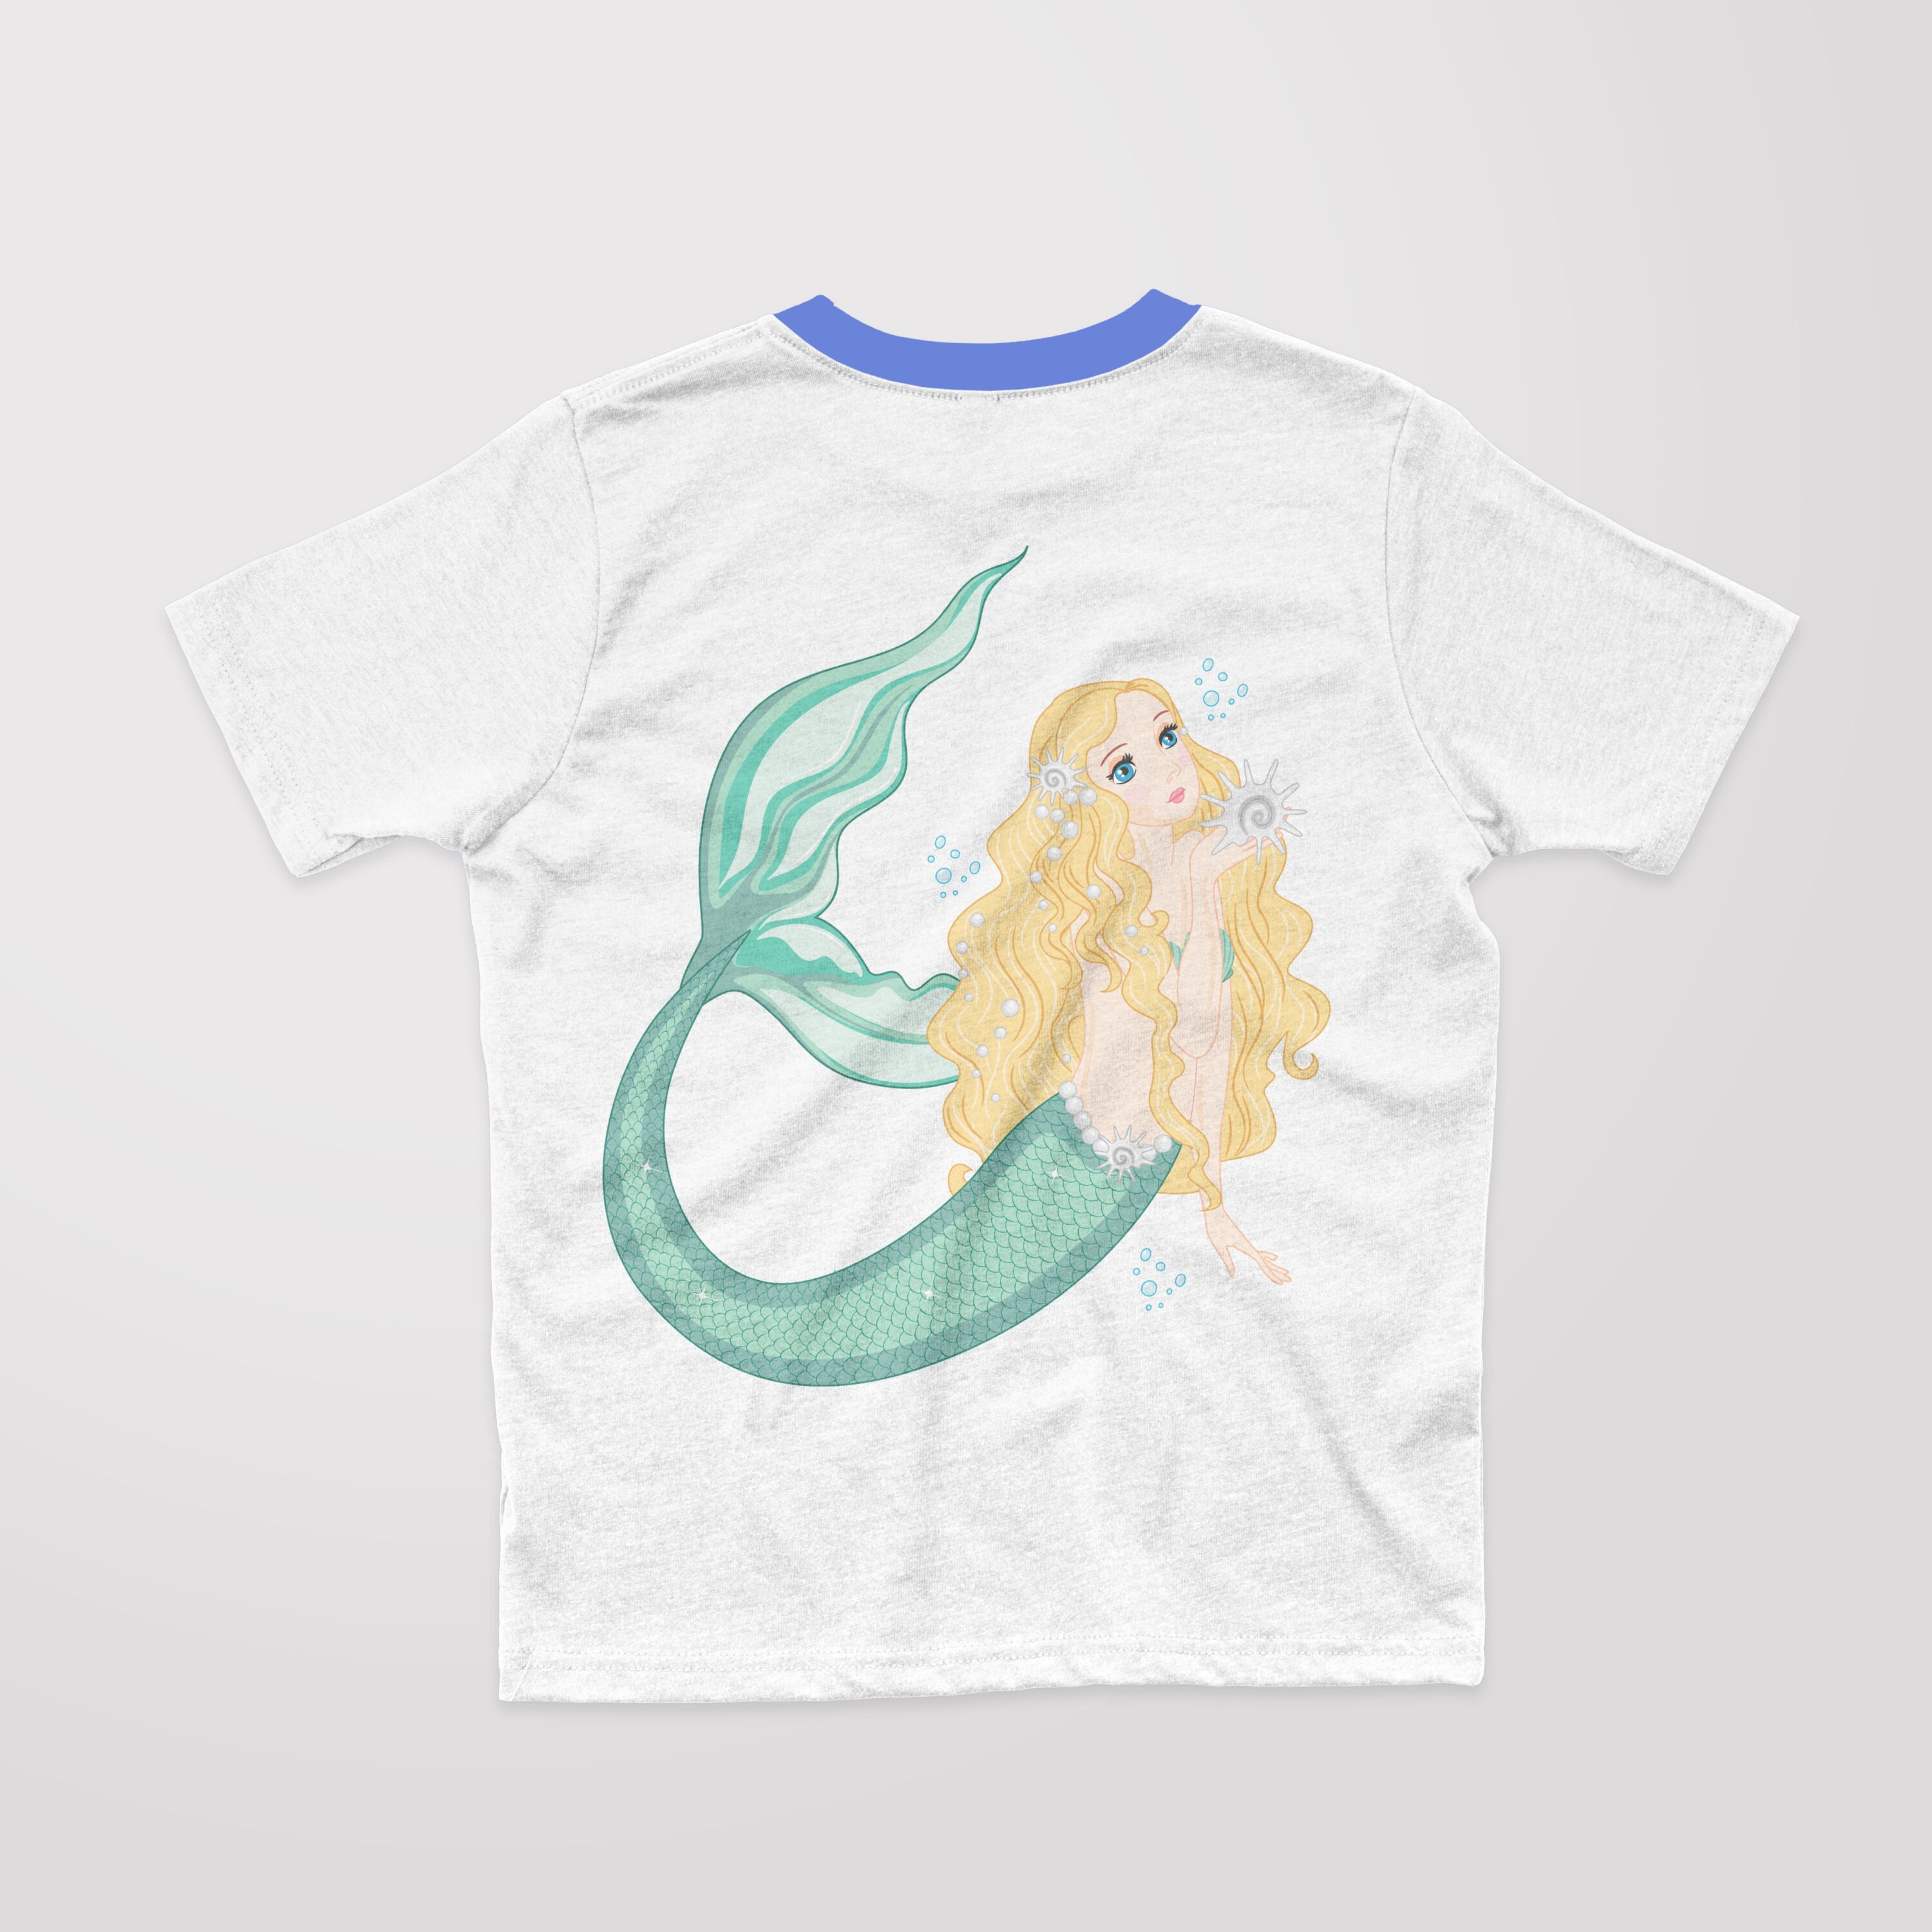 Pretty blonde mermaid with the green tail.